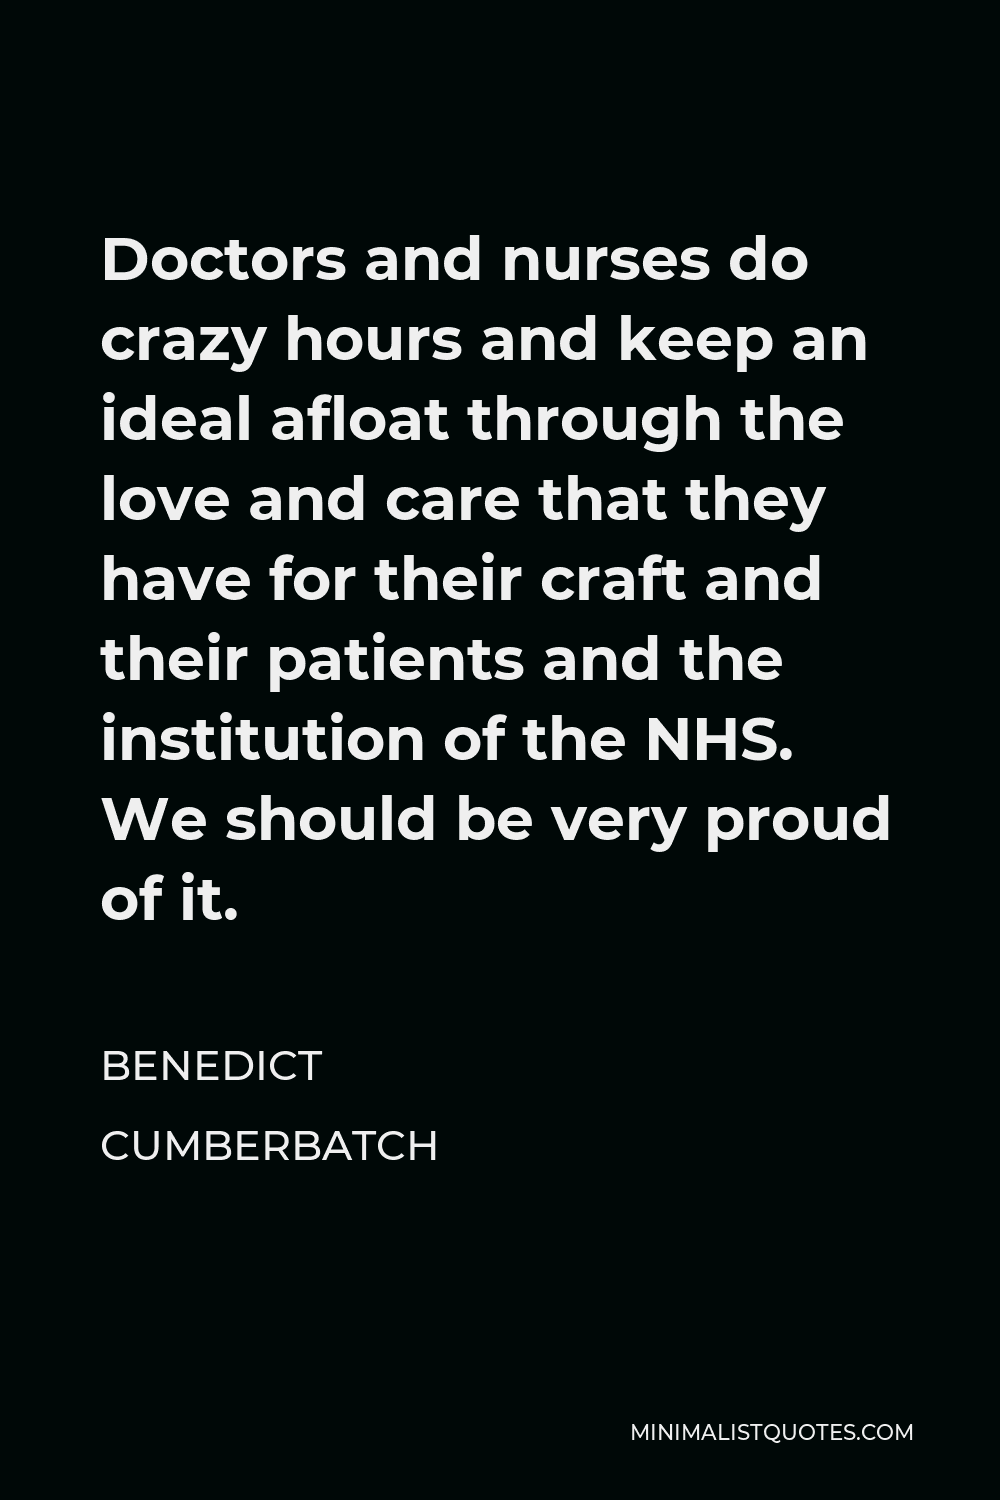 Benedict Cumberbatch Quote - Doctors and nurses do crazy hours and keep an ideal afloat through the love and care that they have for their craft and their patients and the institution of the NHS. We should be very proud of it.